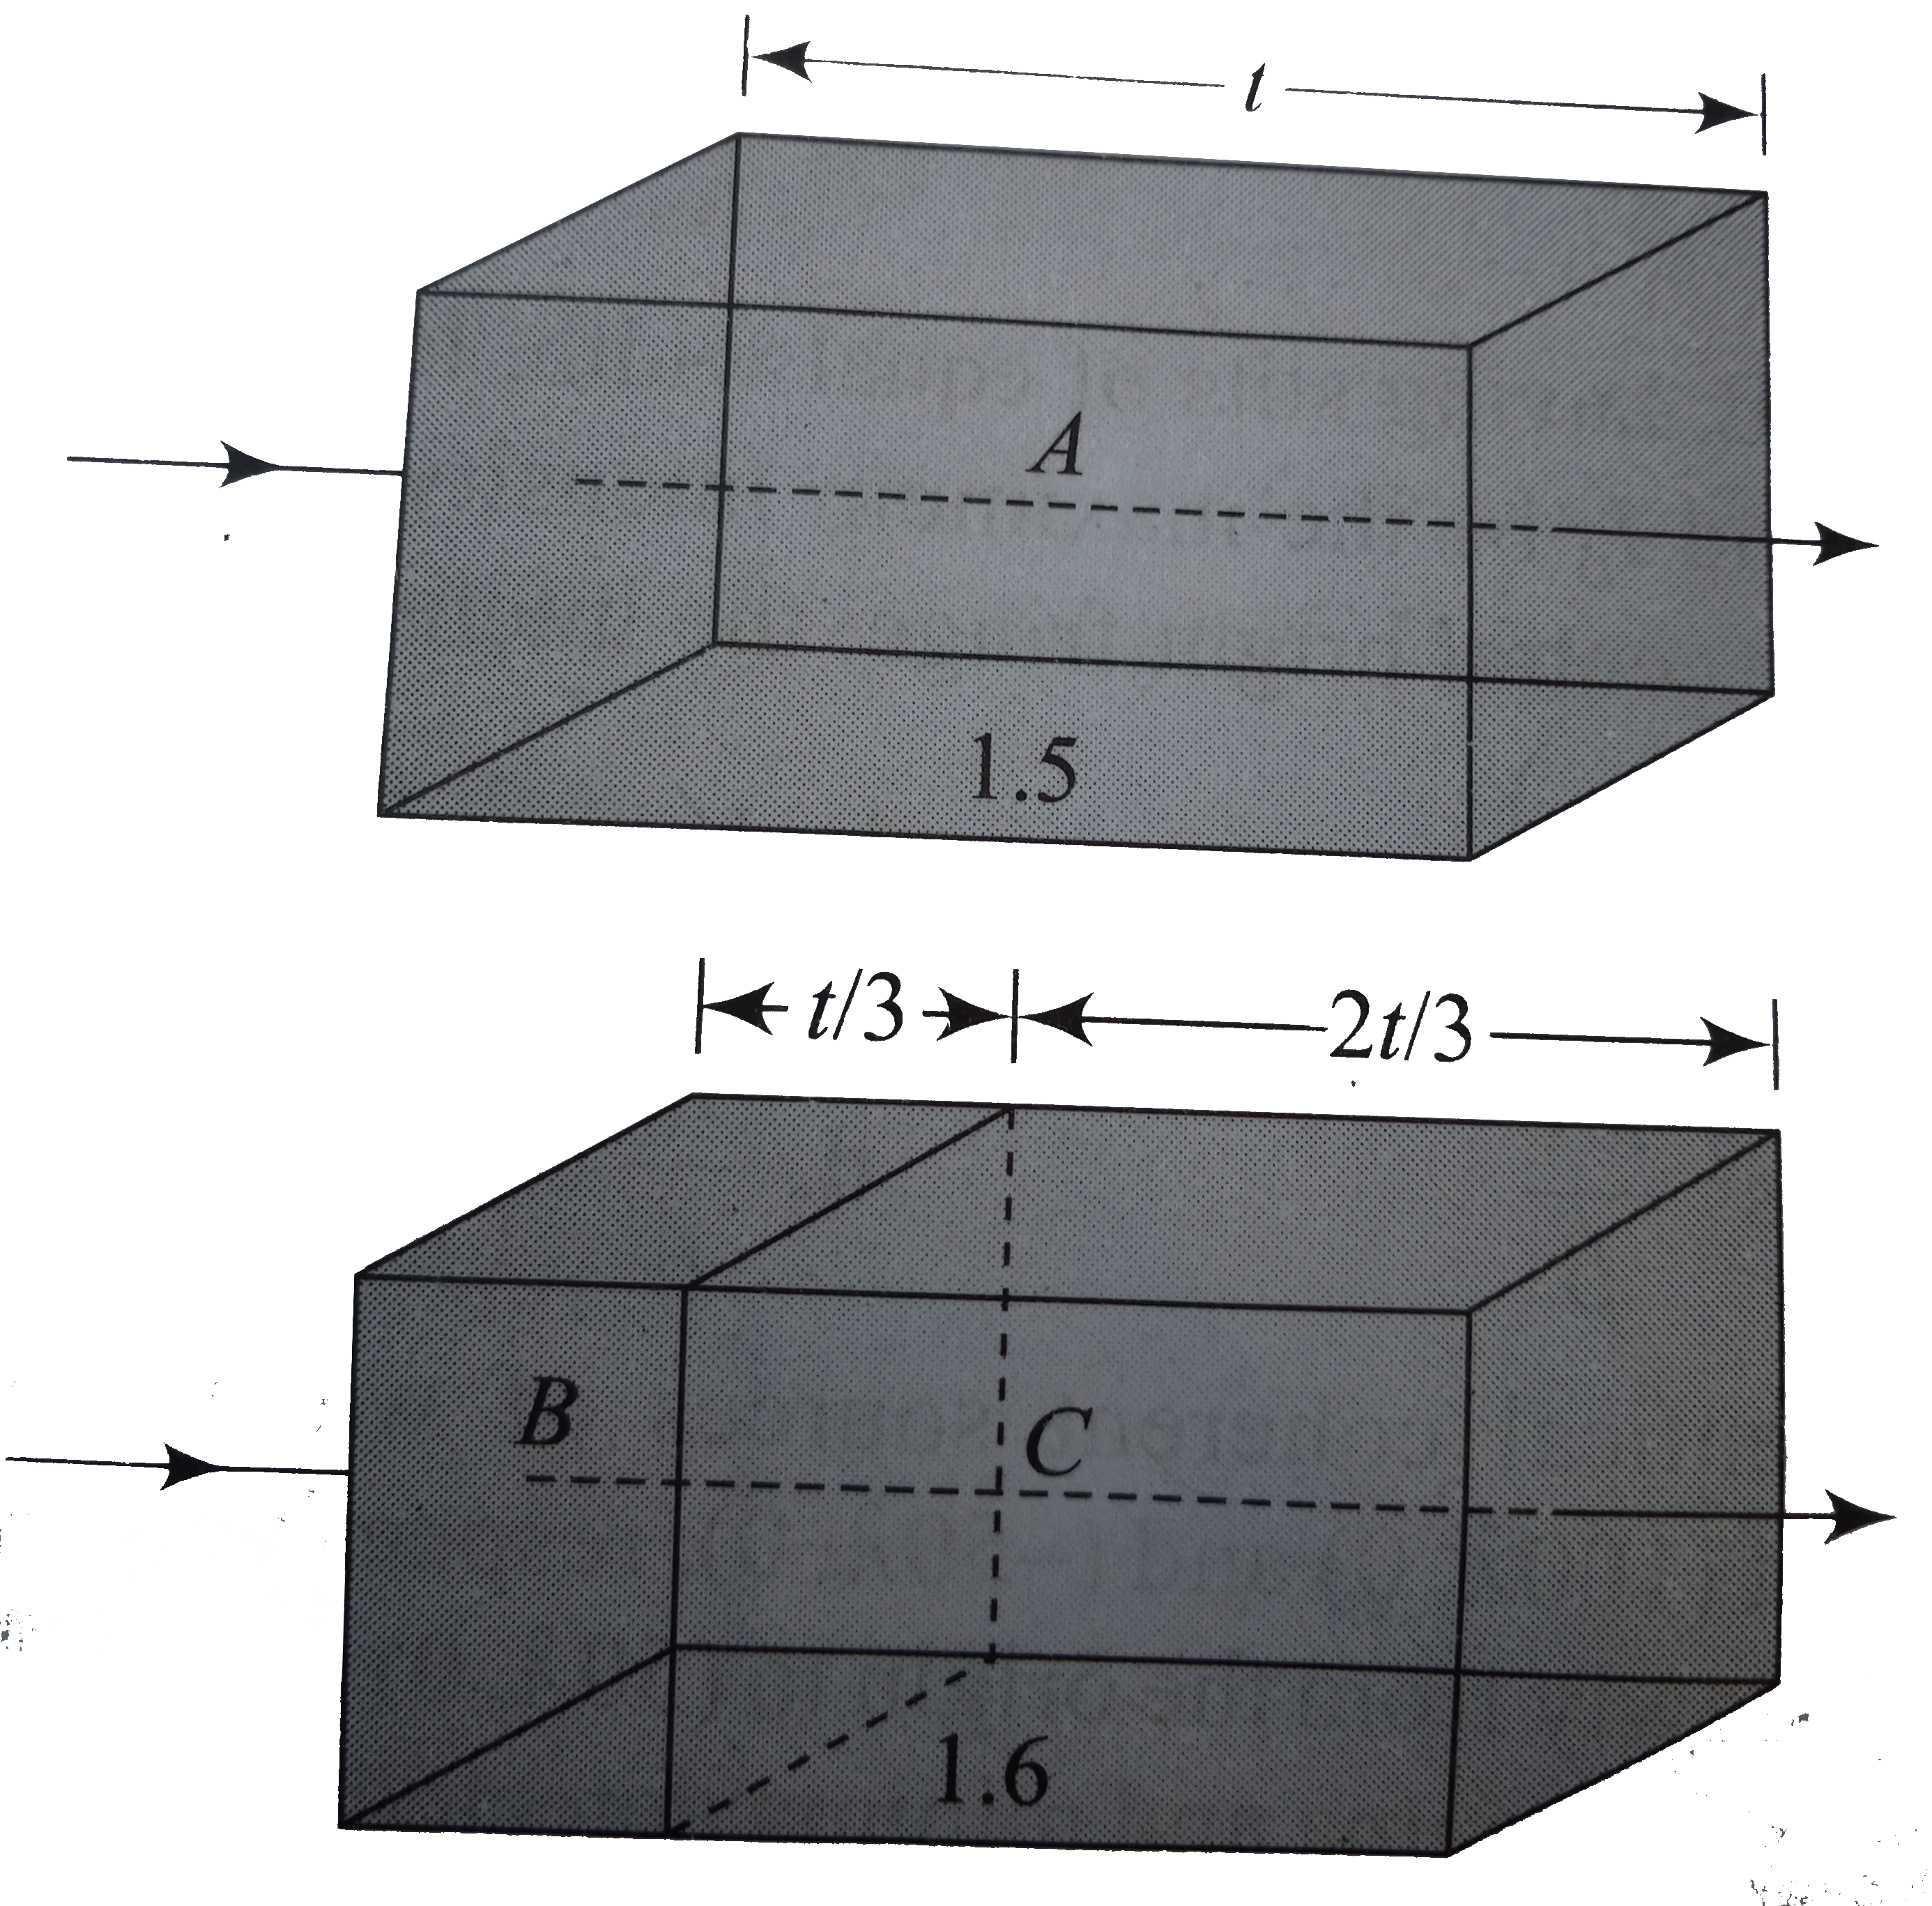 Two transparent slabs have the same thickness as shown in figure. One in made of material A of refractive index 1.5. The other is made of two materilas B  and C with thickness in the ratio 1:2. The refractive index of C is 1.6. If a monochromatic parallel beam passing through the slabs has the same number of wavelengths inside both, the refractive index of B is